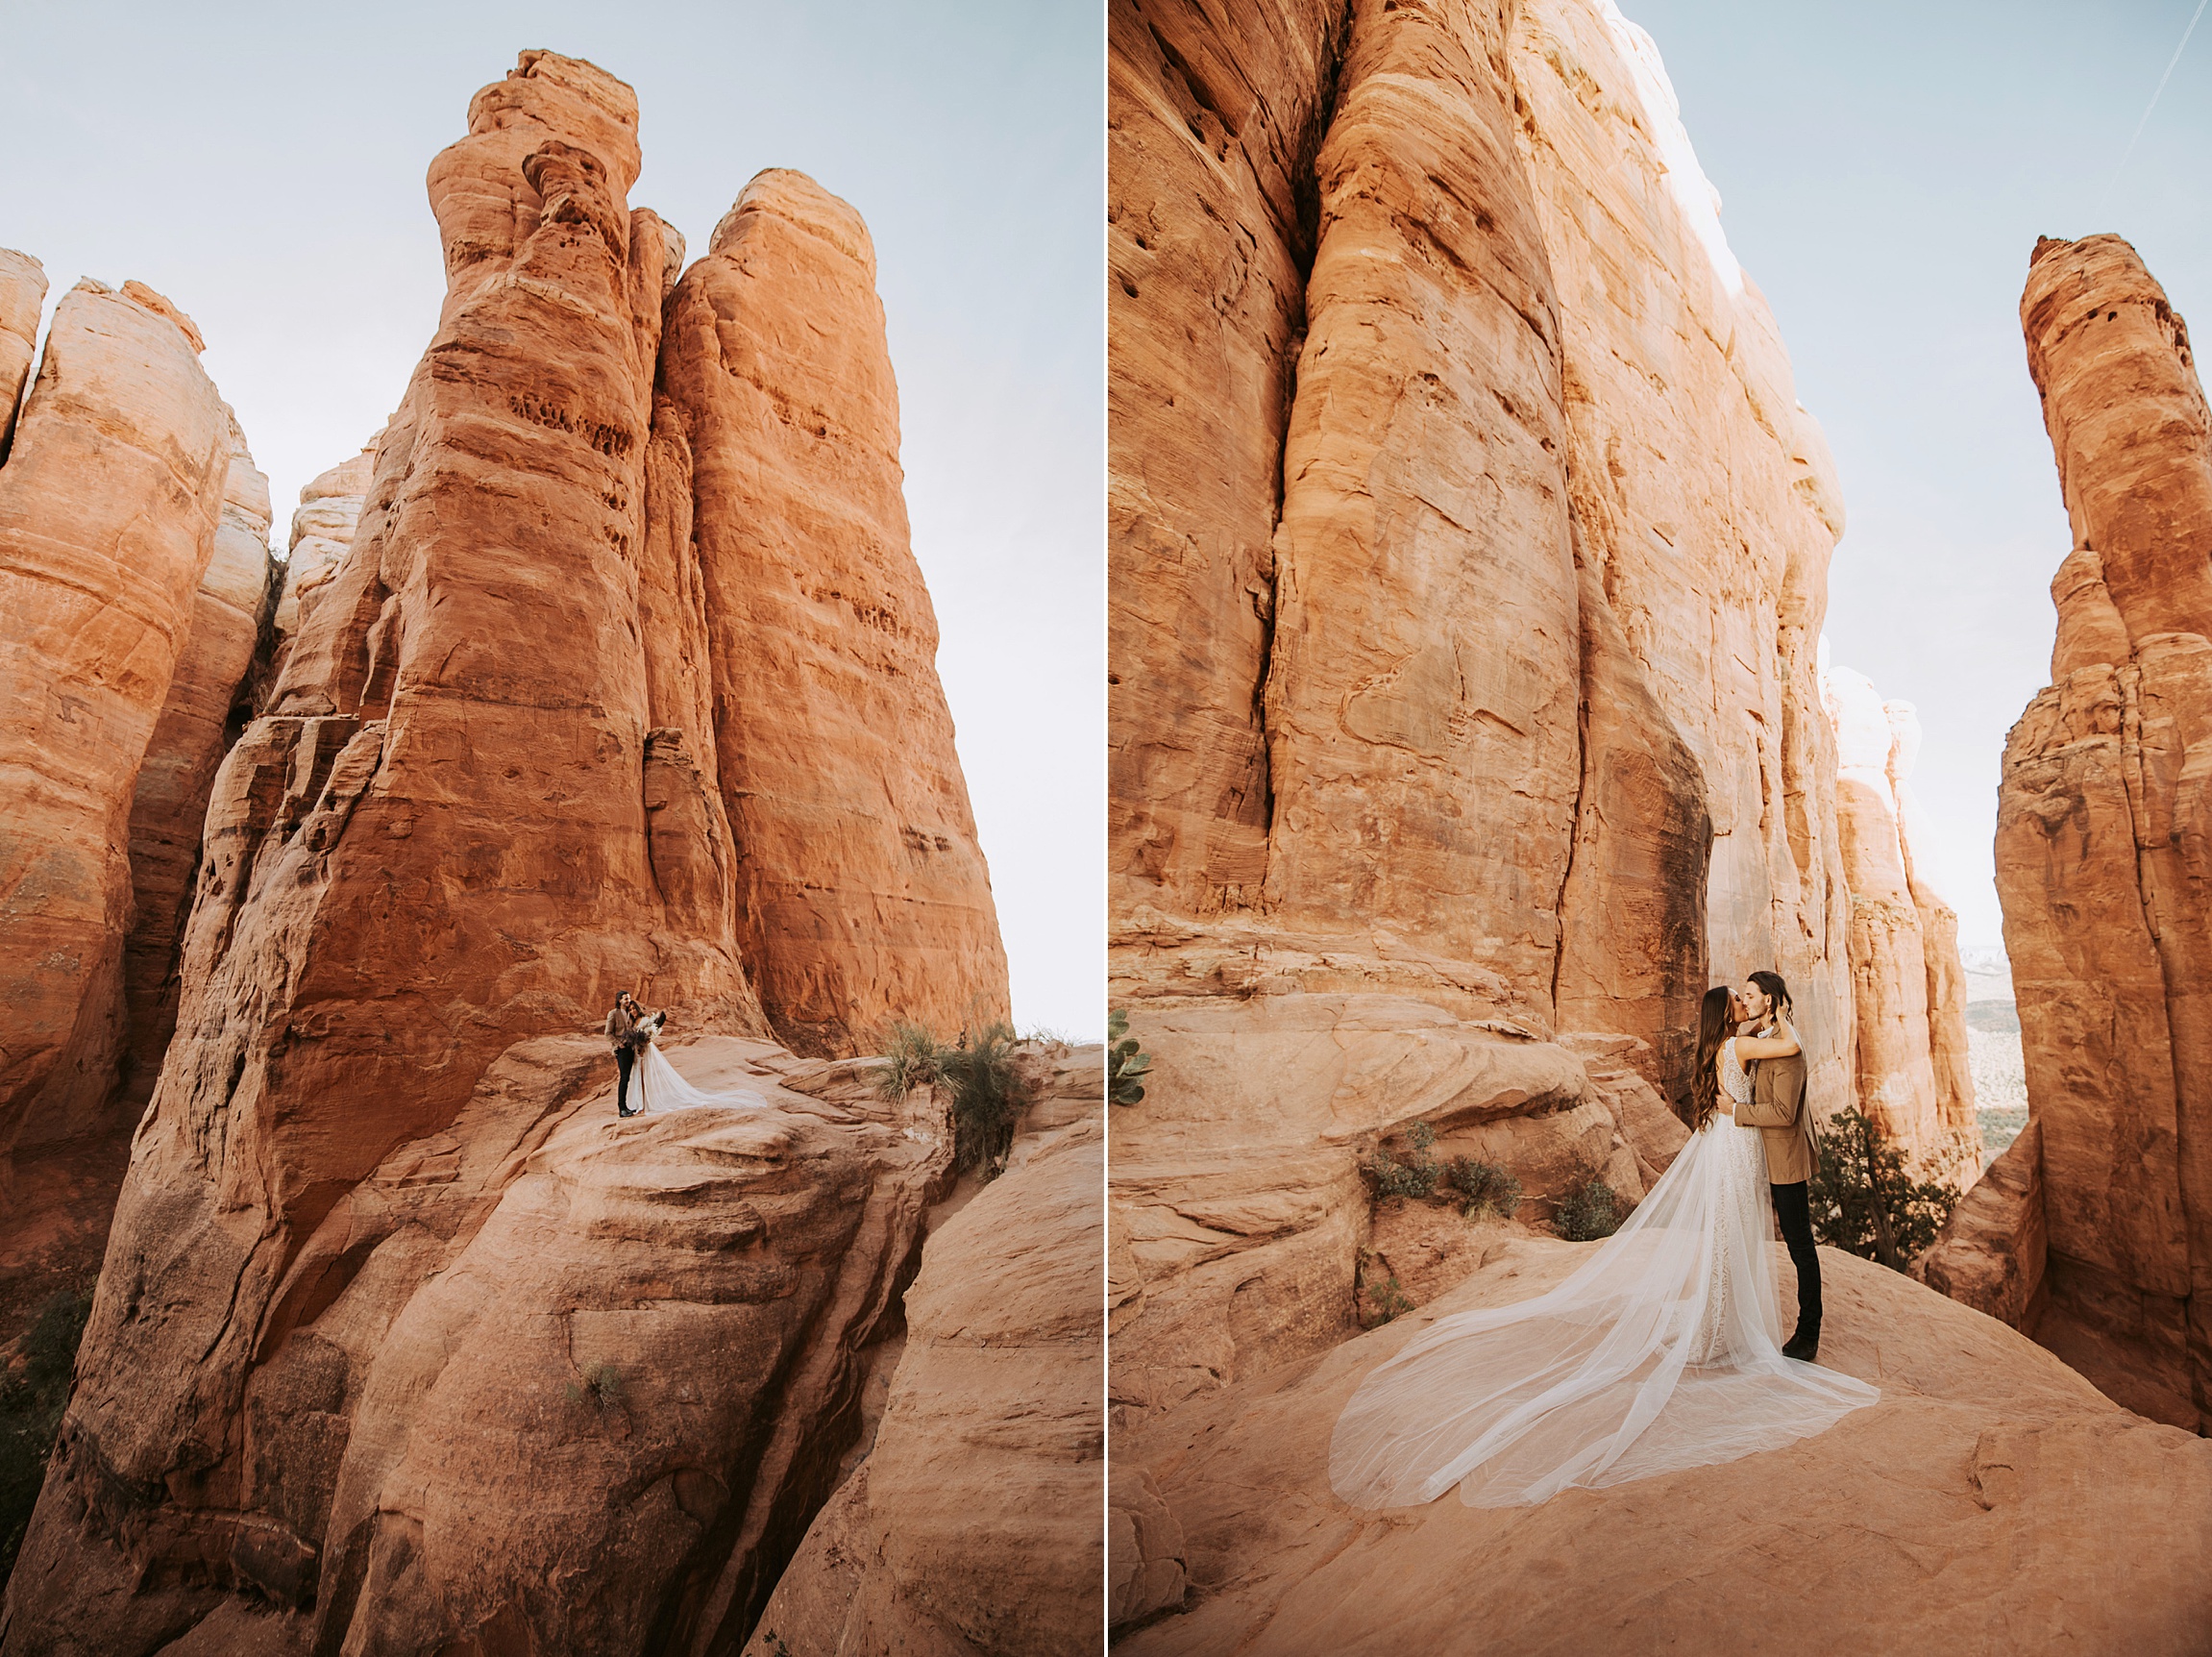 Engagement in Sedona AZ, Elopement in Sedona, Bride and Groom, Harley Davidson Motorcycle, Le Laurier Bridal, Adventurous Elopement, Arizona Wedding Photographer, Engaged, Cathedral Rock Elopement, Adventurous elopement, bohemian bride,